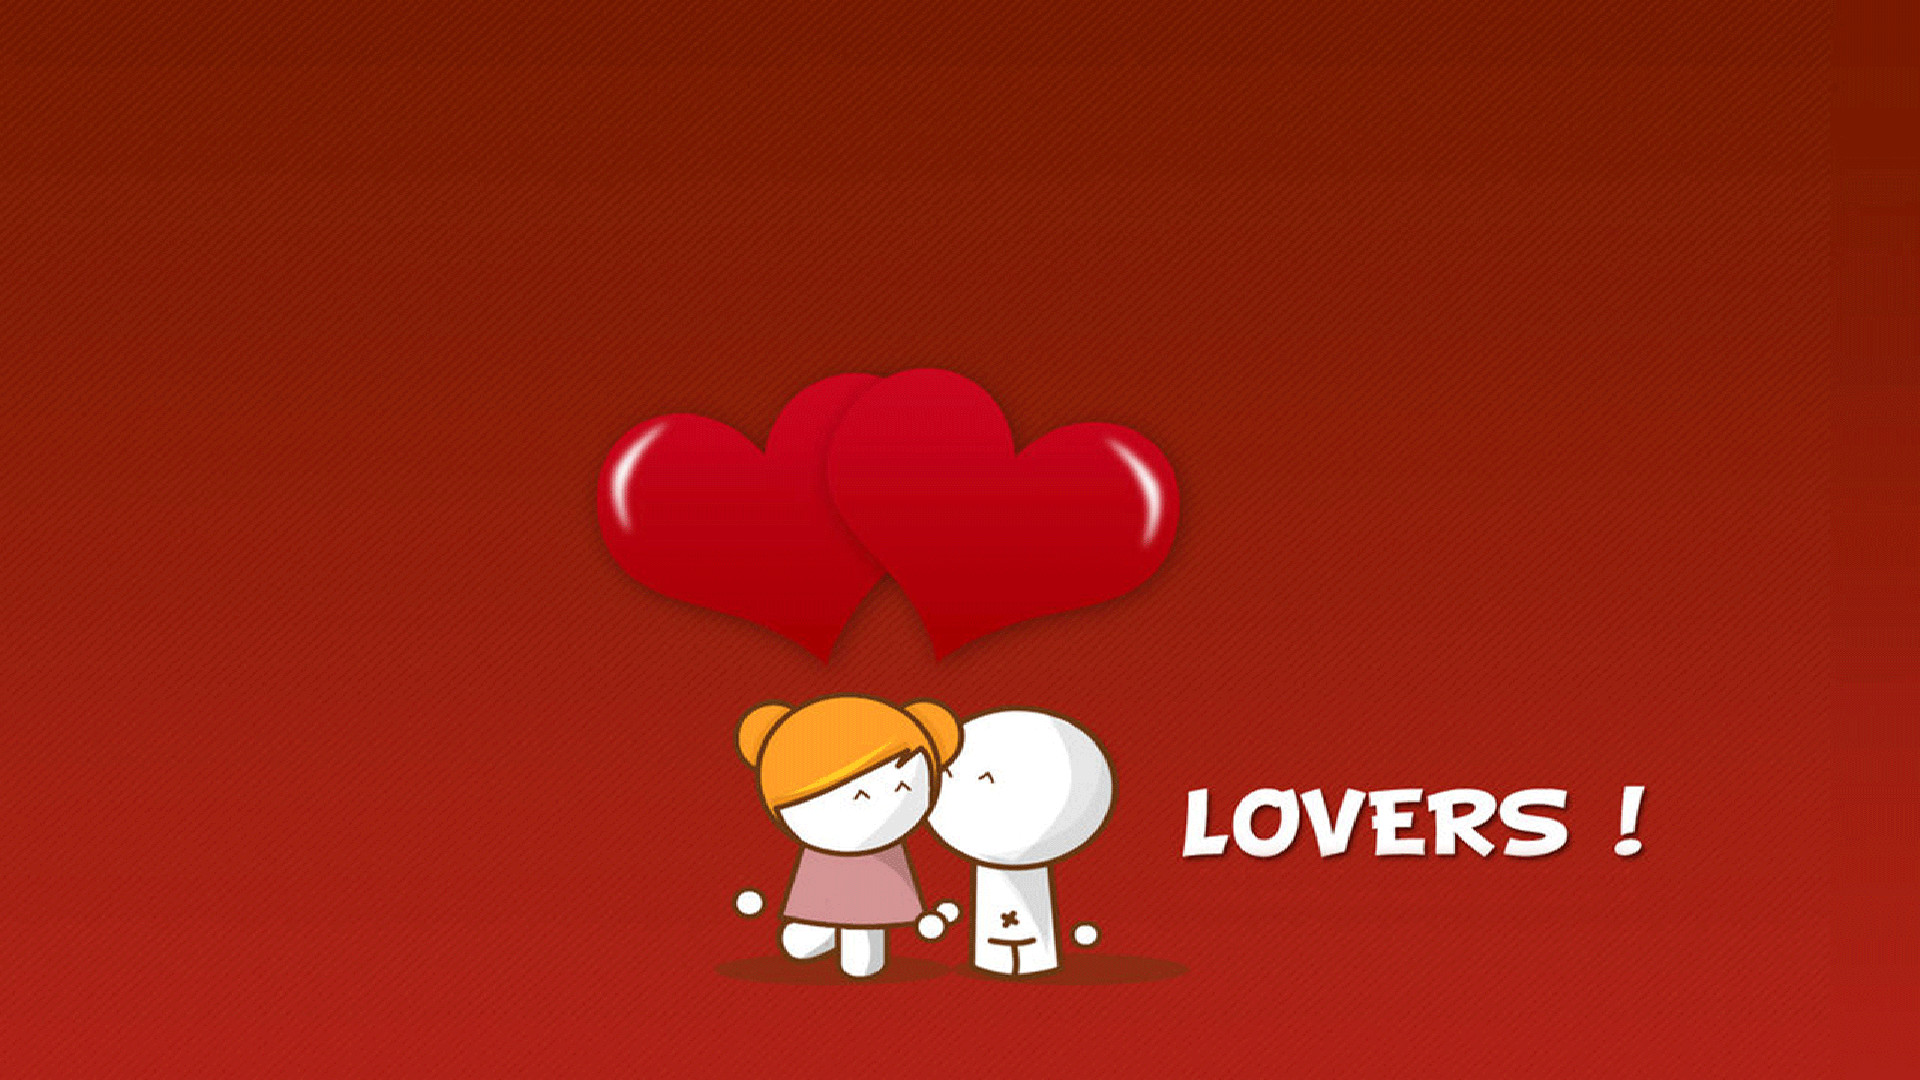 I Love You Images And Hd Photos 17 1920x1080